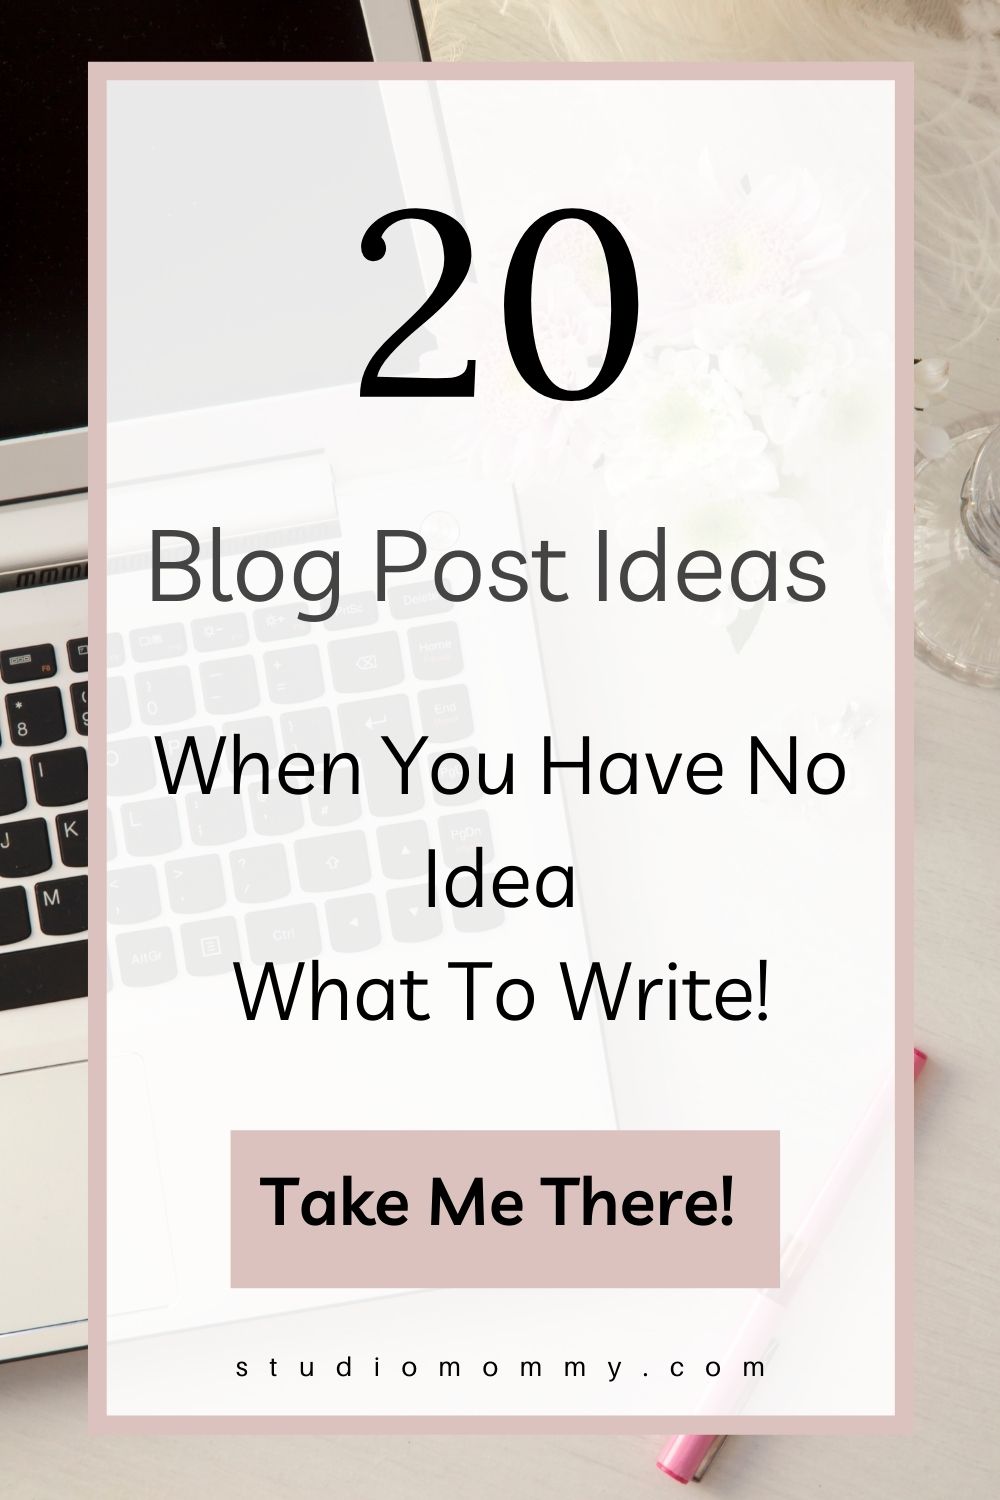 How many times as a blogger have you struggled with trying to figure out what to post? We have all experienced writer’s block at one point or another in our blogging career. Today I thought I would share a few blog post ideas to rejuvenate and get those creative juices flowing again. These ideas can also inspire you if you’re a new blogger and do not know where to start. Here are 20 blog post ideas that could work for just about any niche with a tweak here and there.